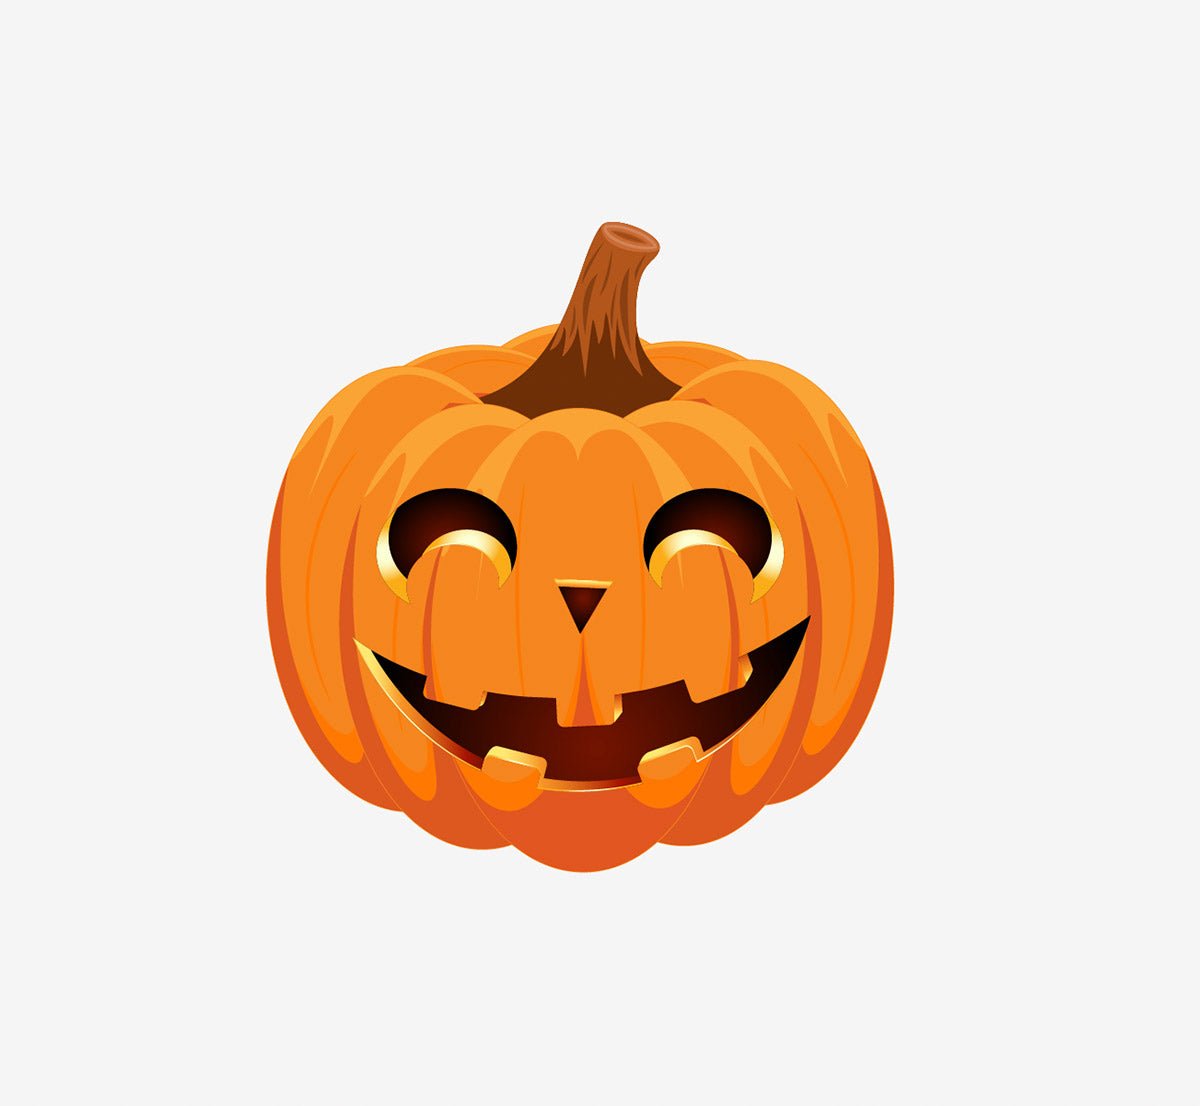 A Halloween themed Jack O' Lantern decal on a white background.